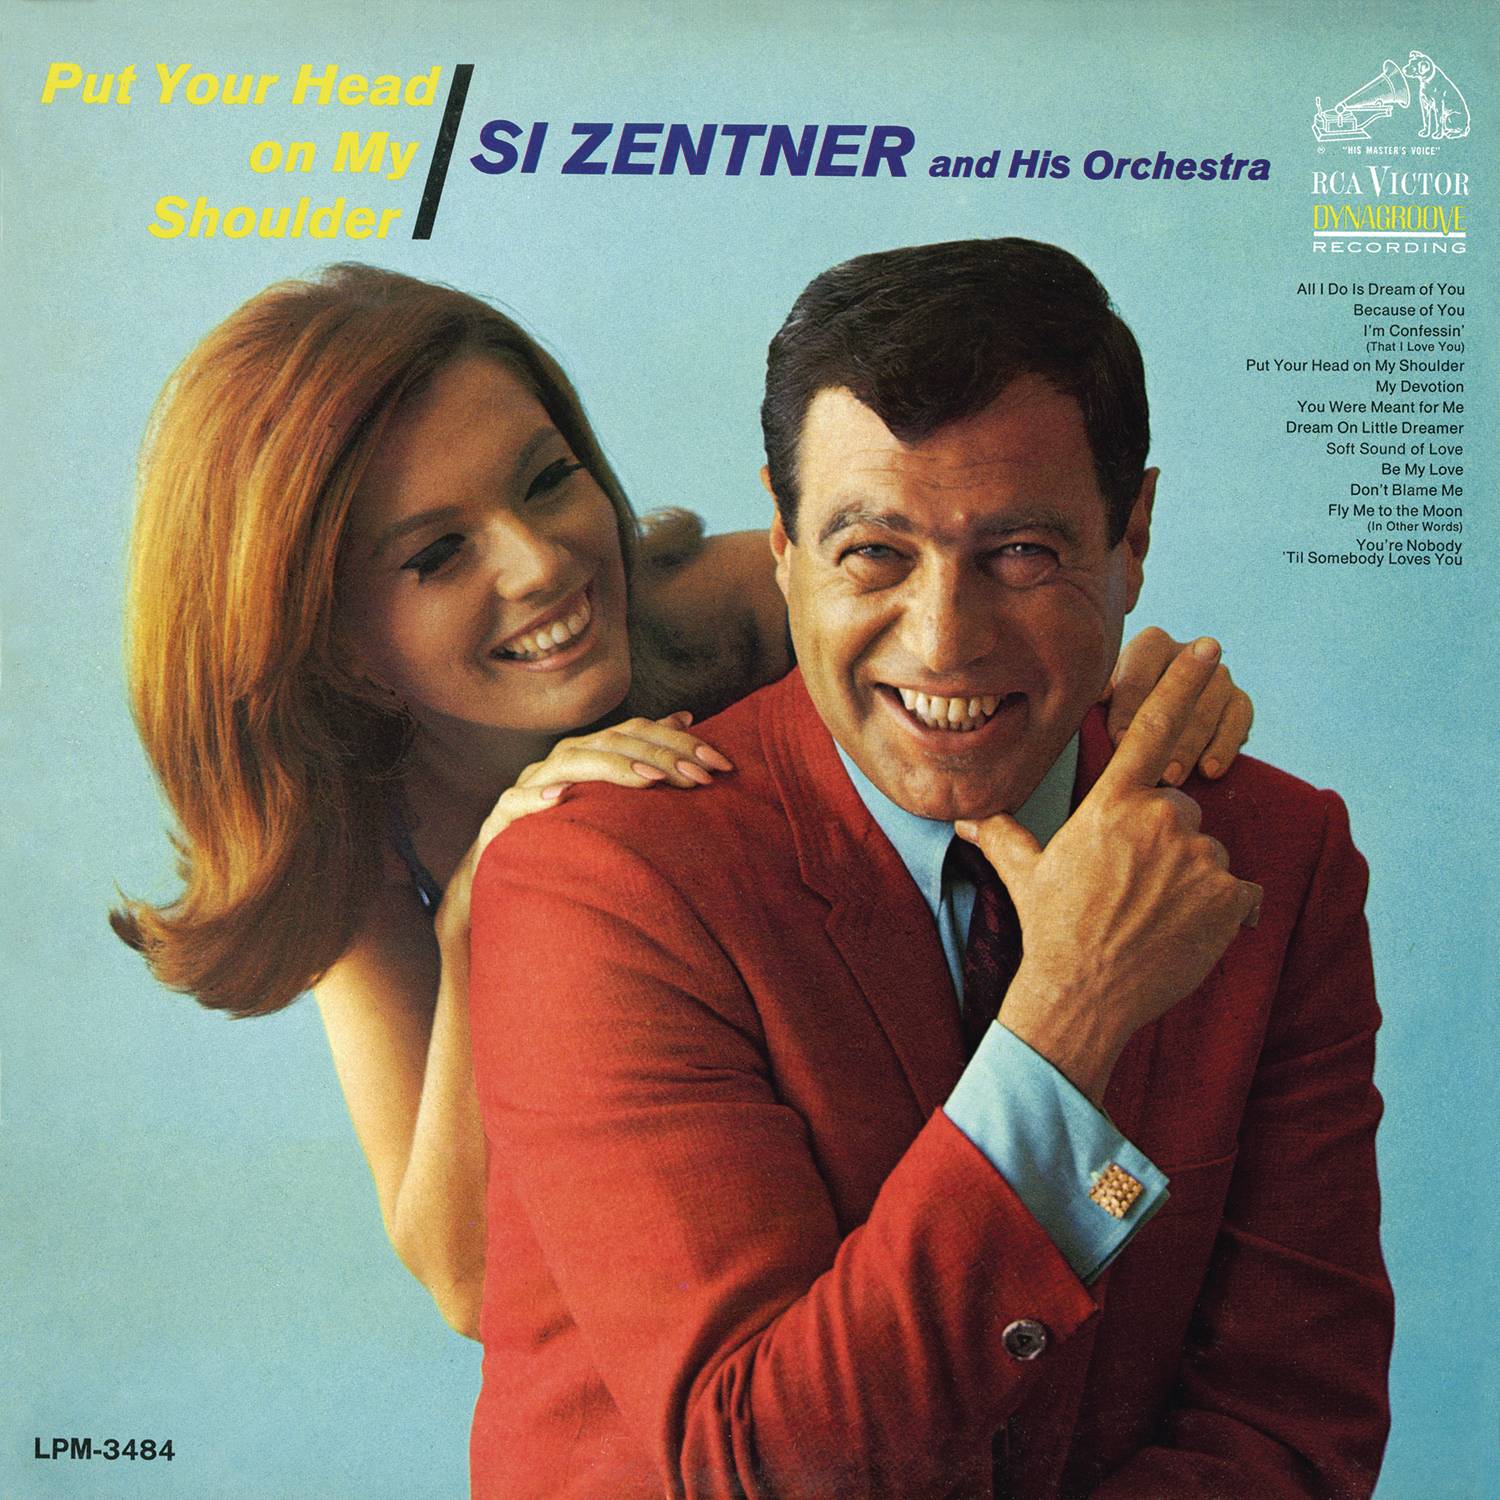 Si Zentner And His Orchestra – Put Your Head On My Shoulder (1966/2015) [AcousticSounds FLAC 24bit/96kHz]